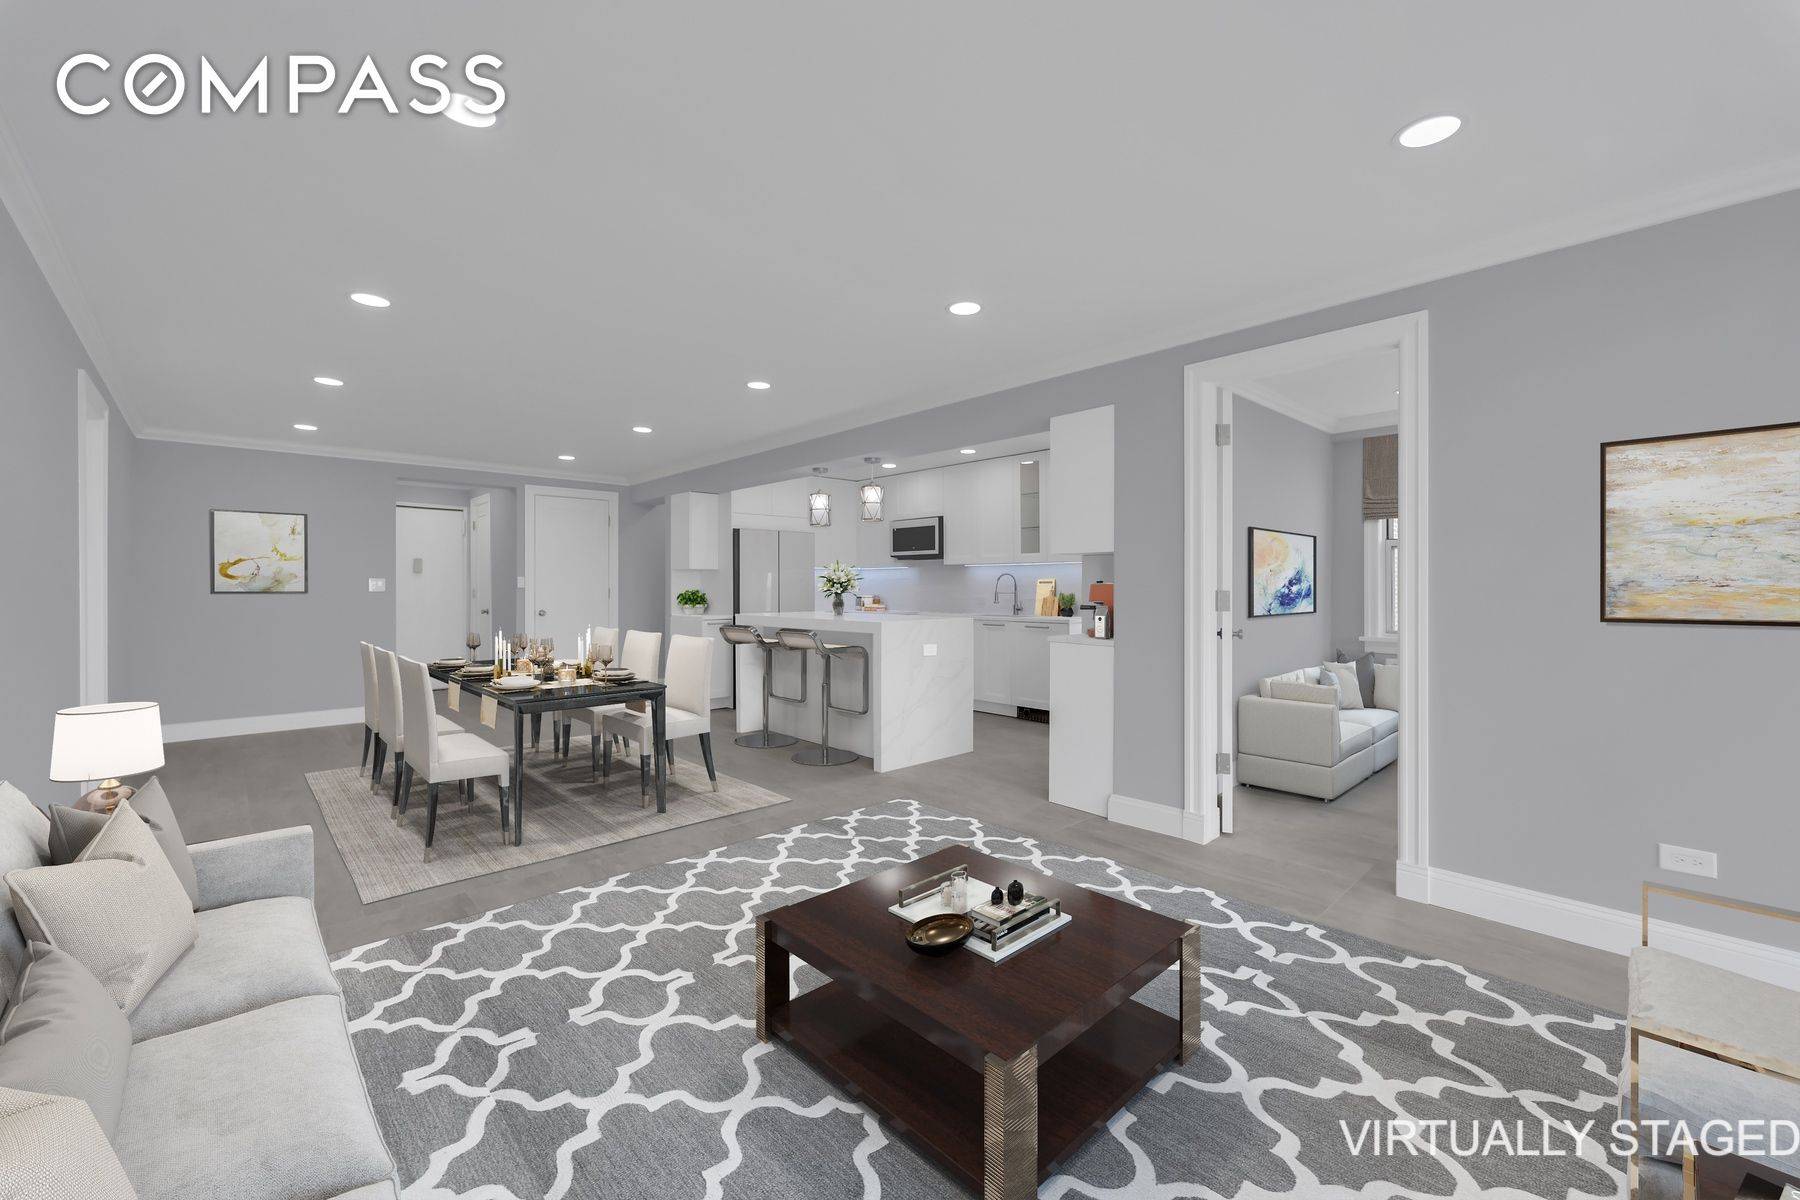 Turn Key, Impeccably Renovated your dream home in the heart of Riverdale a neighborhood that perfectly blends urban energy with suburban tranquility.